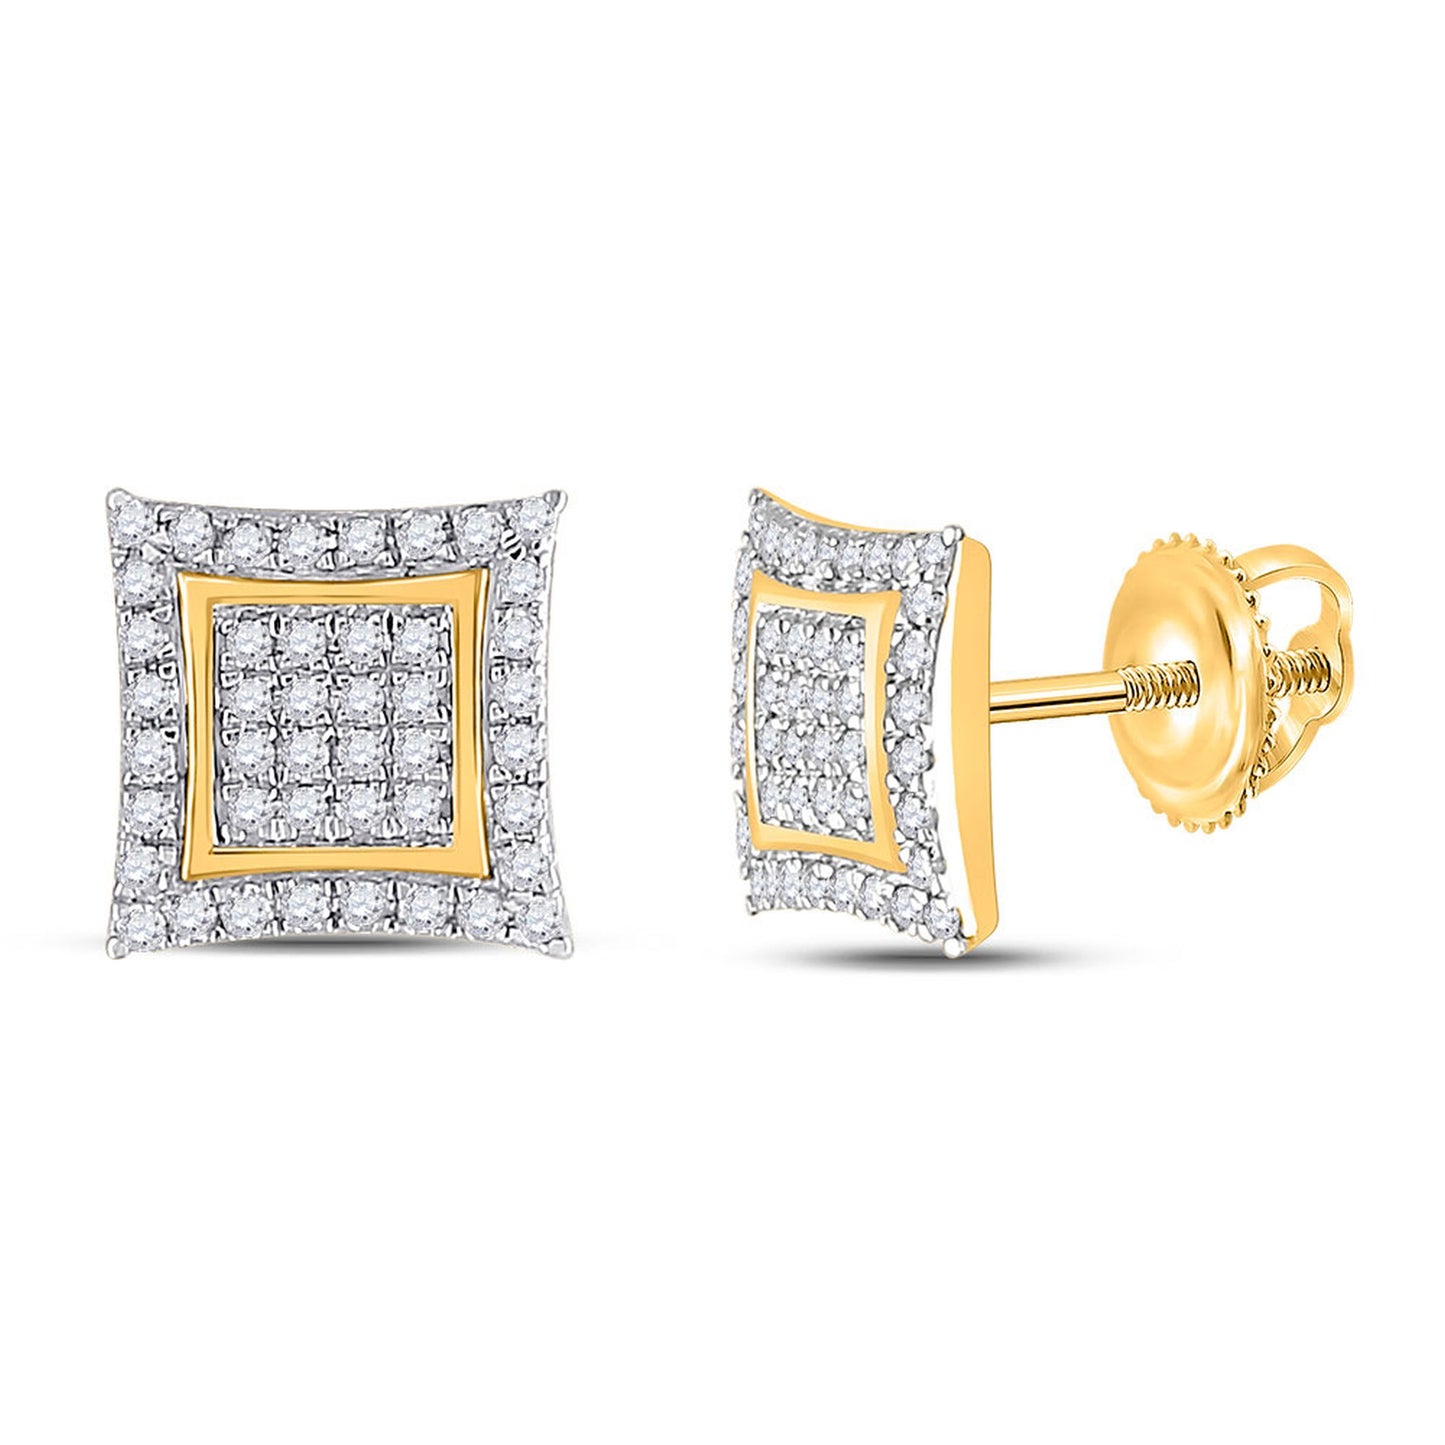 GND 10kt Yellow Gold Womens Round Diamond Kite Square Earrings 1/4 Cttw by GND